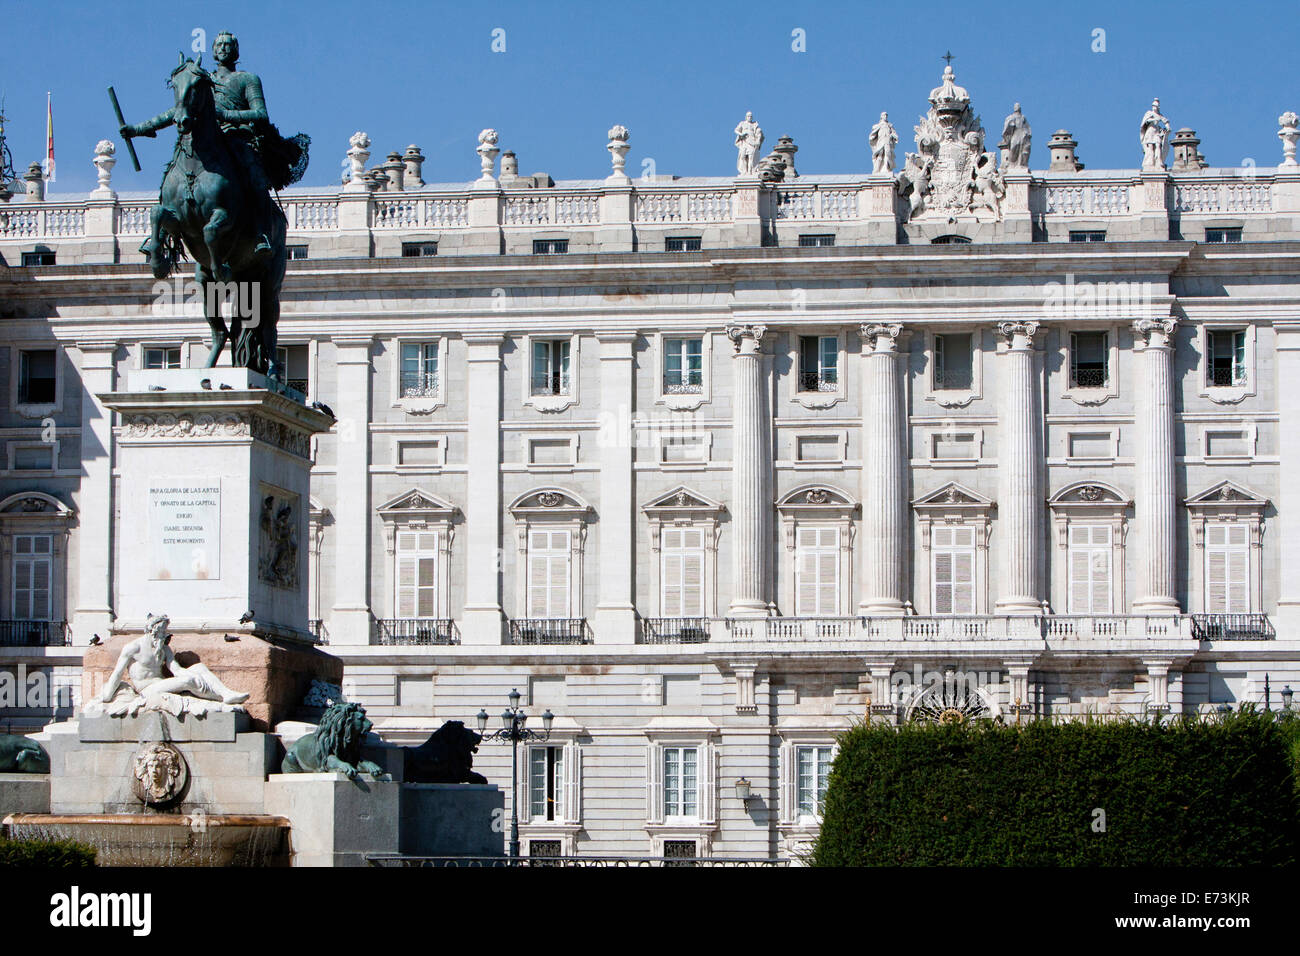 Spain, Madrid, Statue of Philip IV to the left with the Palacio Real in the background. Stock Photo